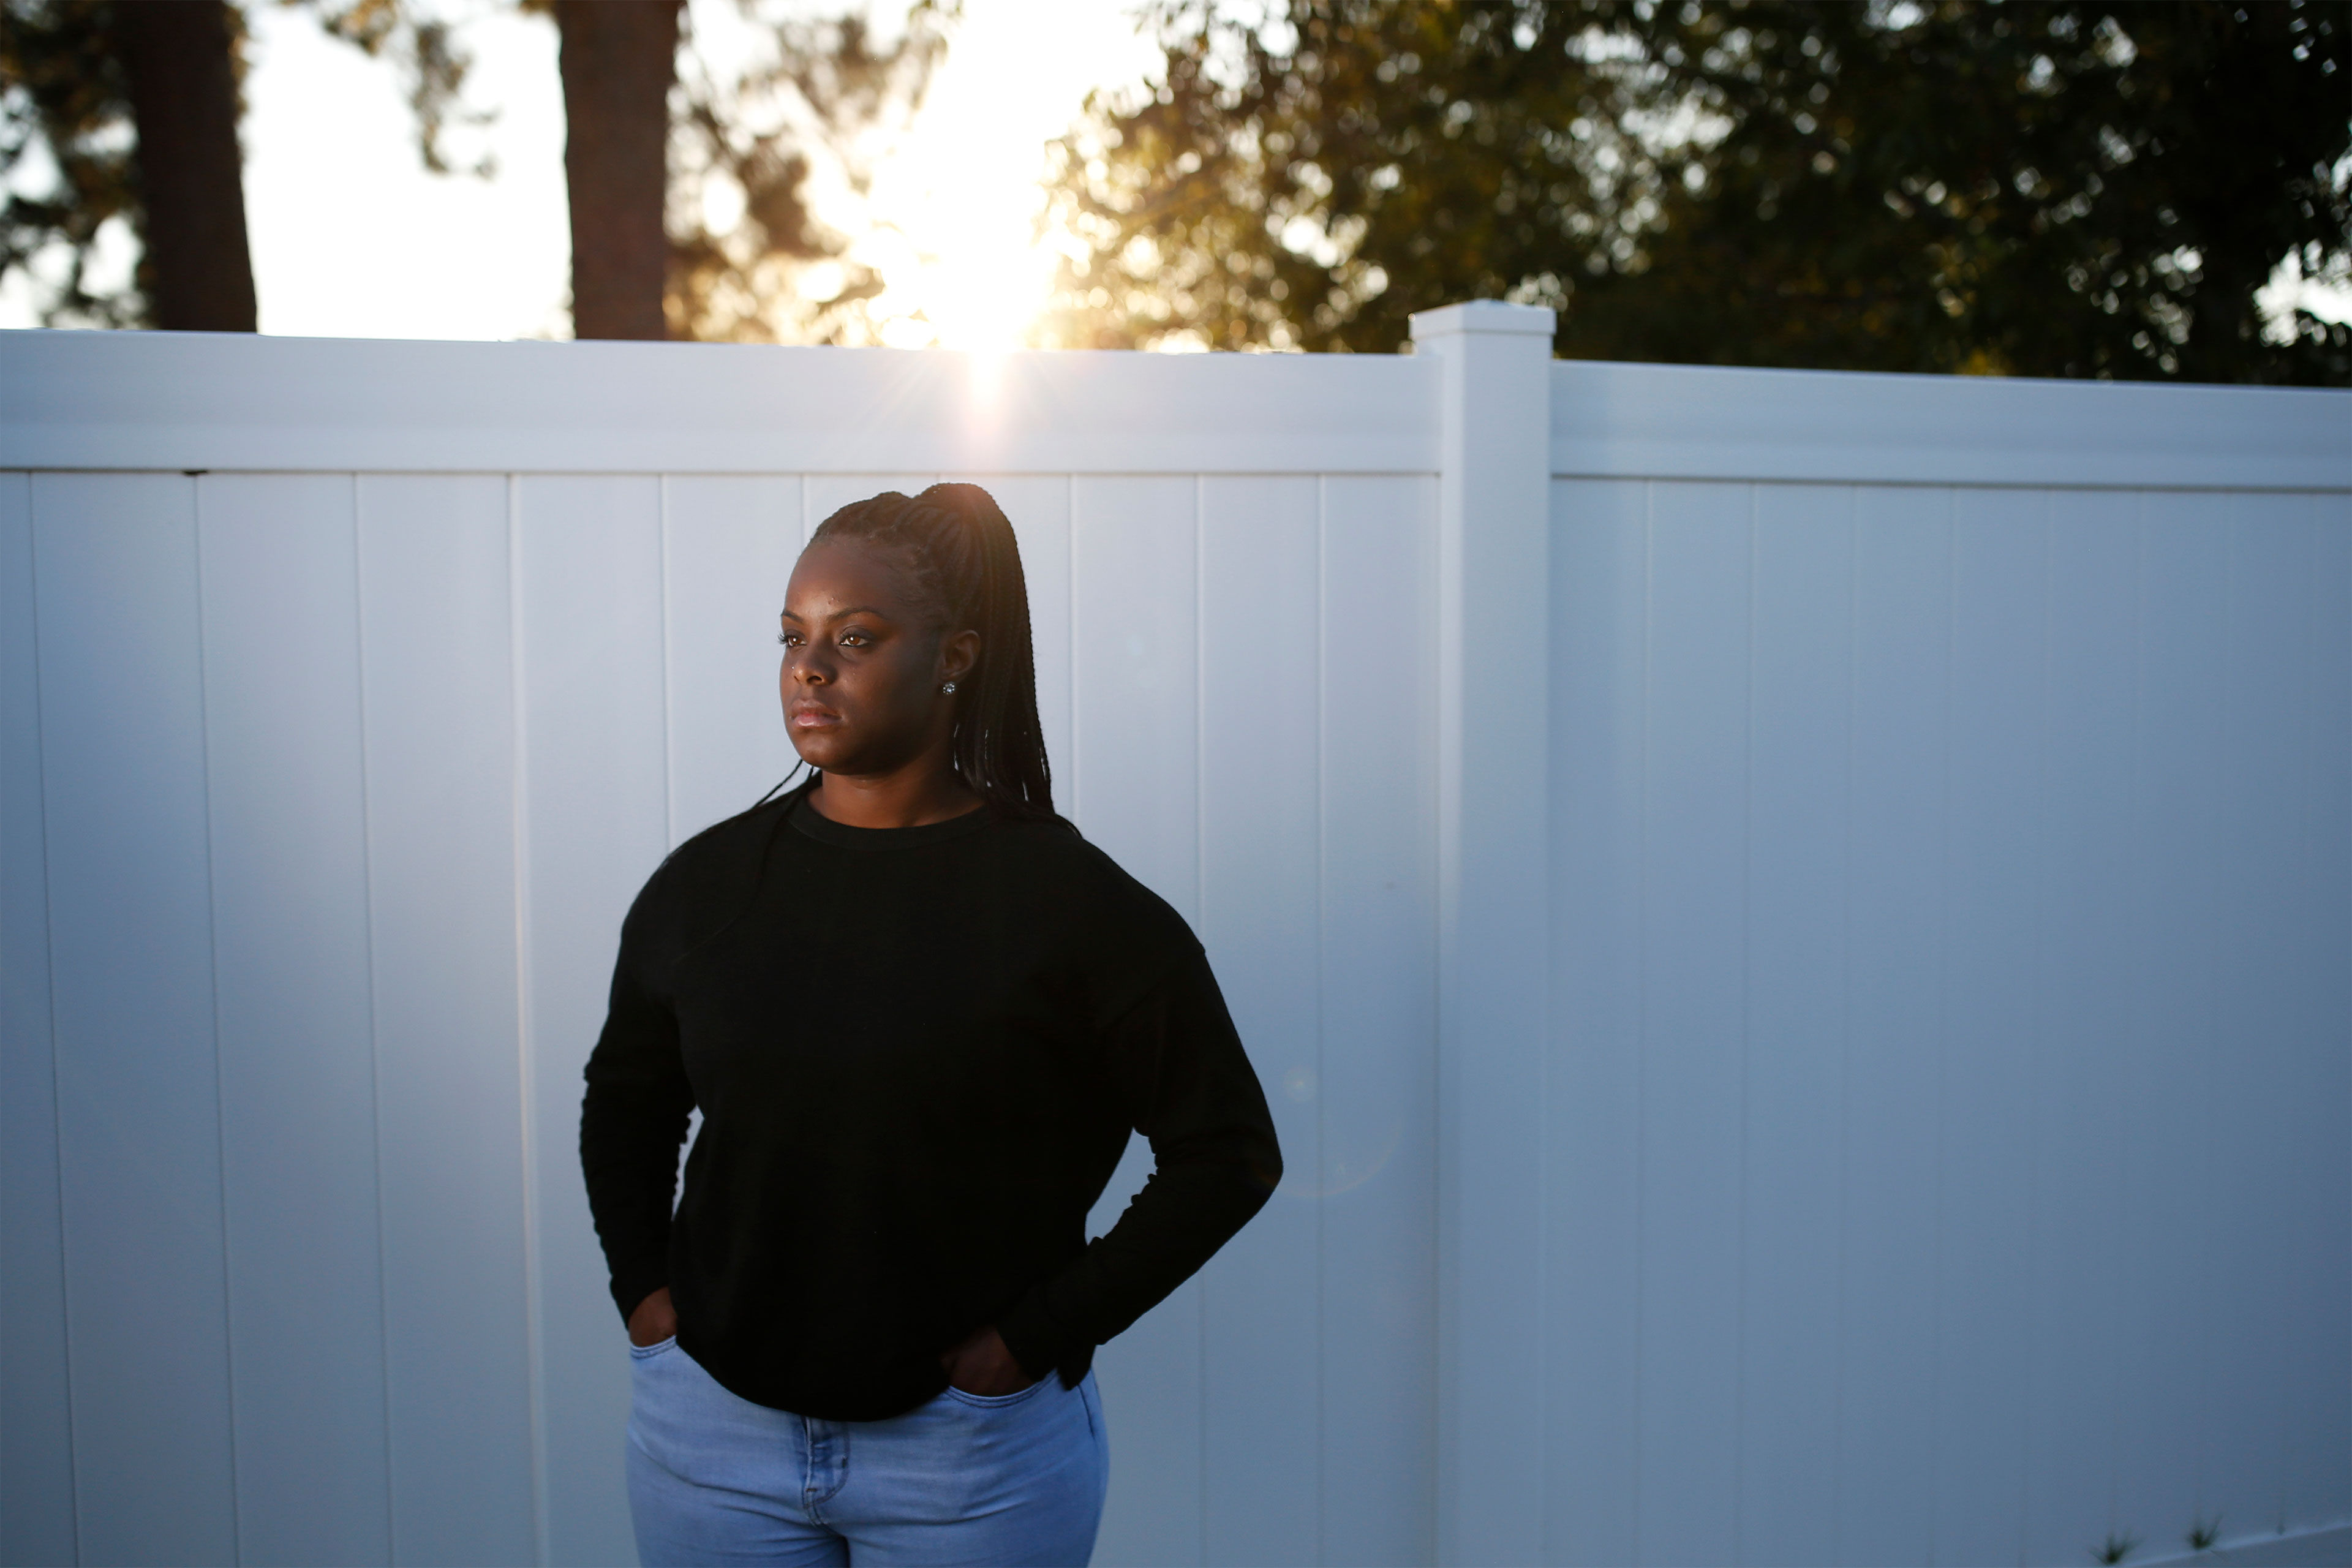 A woman stands outside in front of a tall white fence in late afternoon sun.